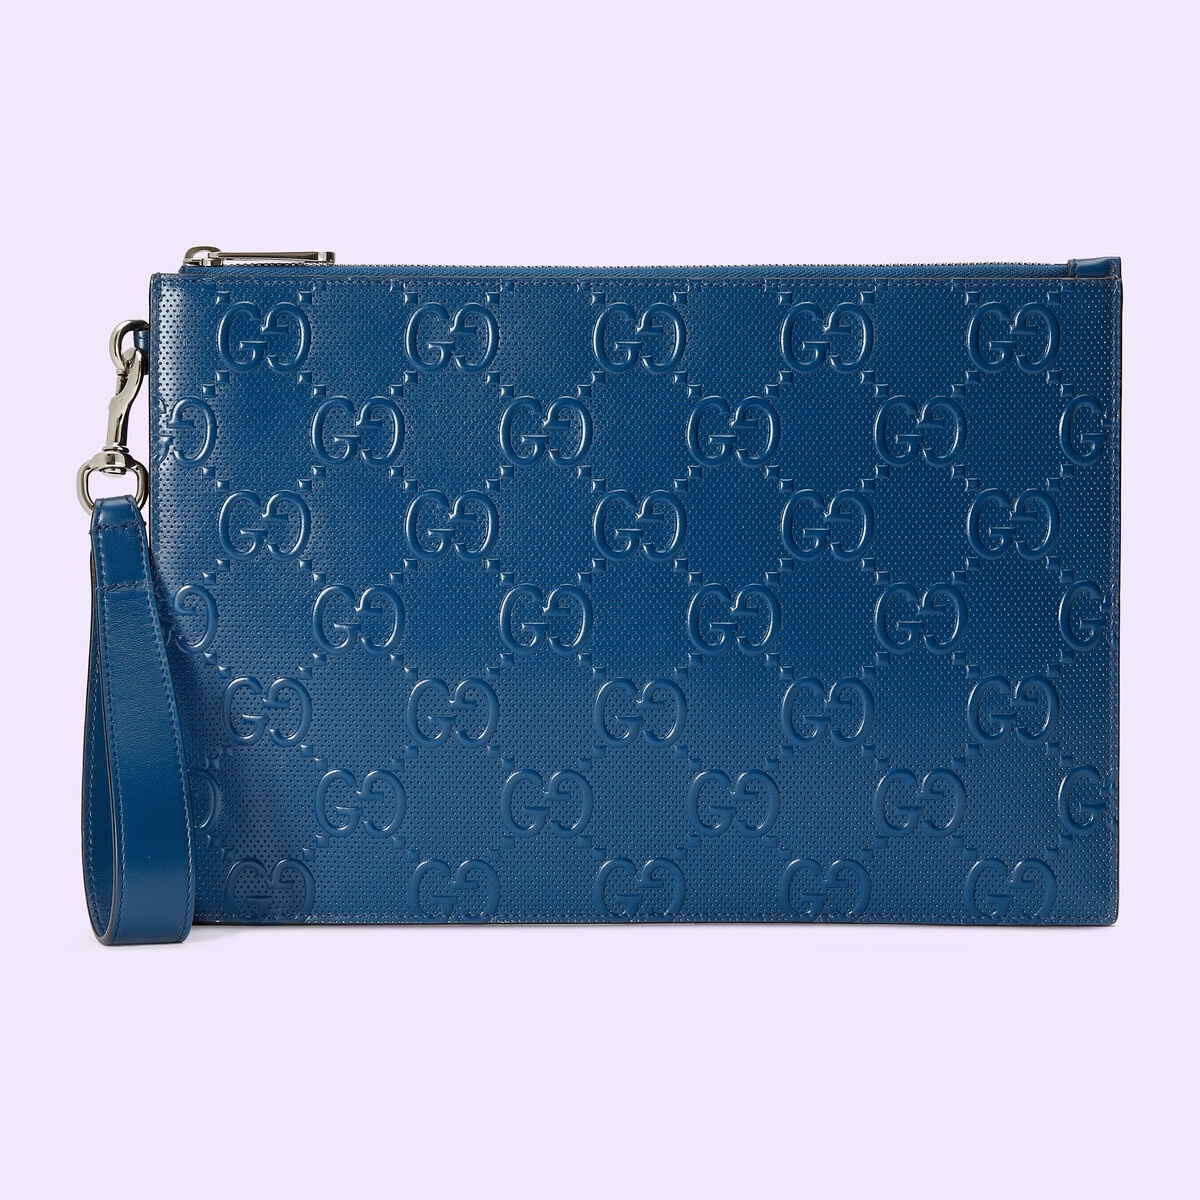 GG embossed pouch - 1